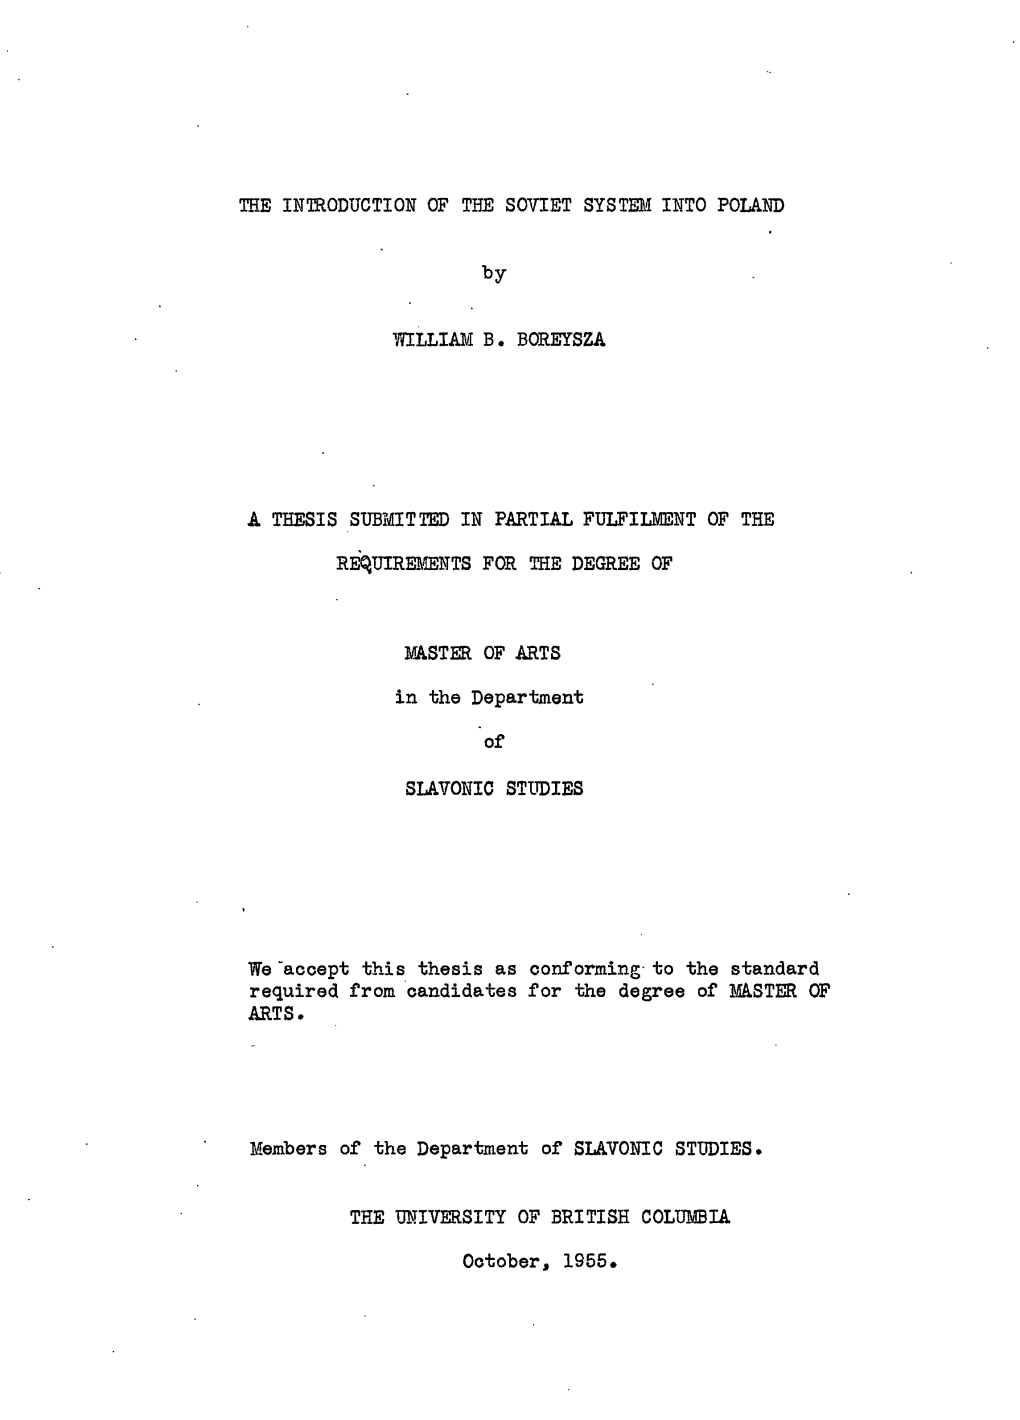 THE INTRODUCTION of the SOVIET SYSTEM INTO POLAND by 77ILLIAM B. BOREYSZA a THESIS SUBMITTED in PARTIAL FULFILMENT of the REQUIR